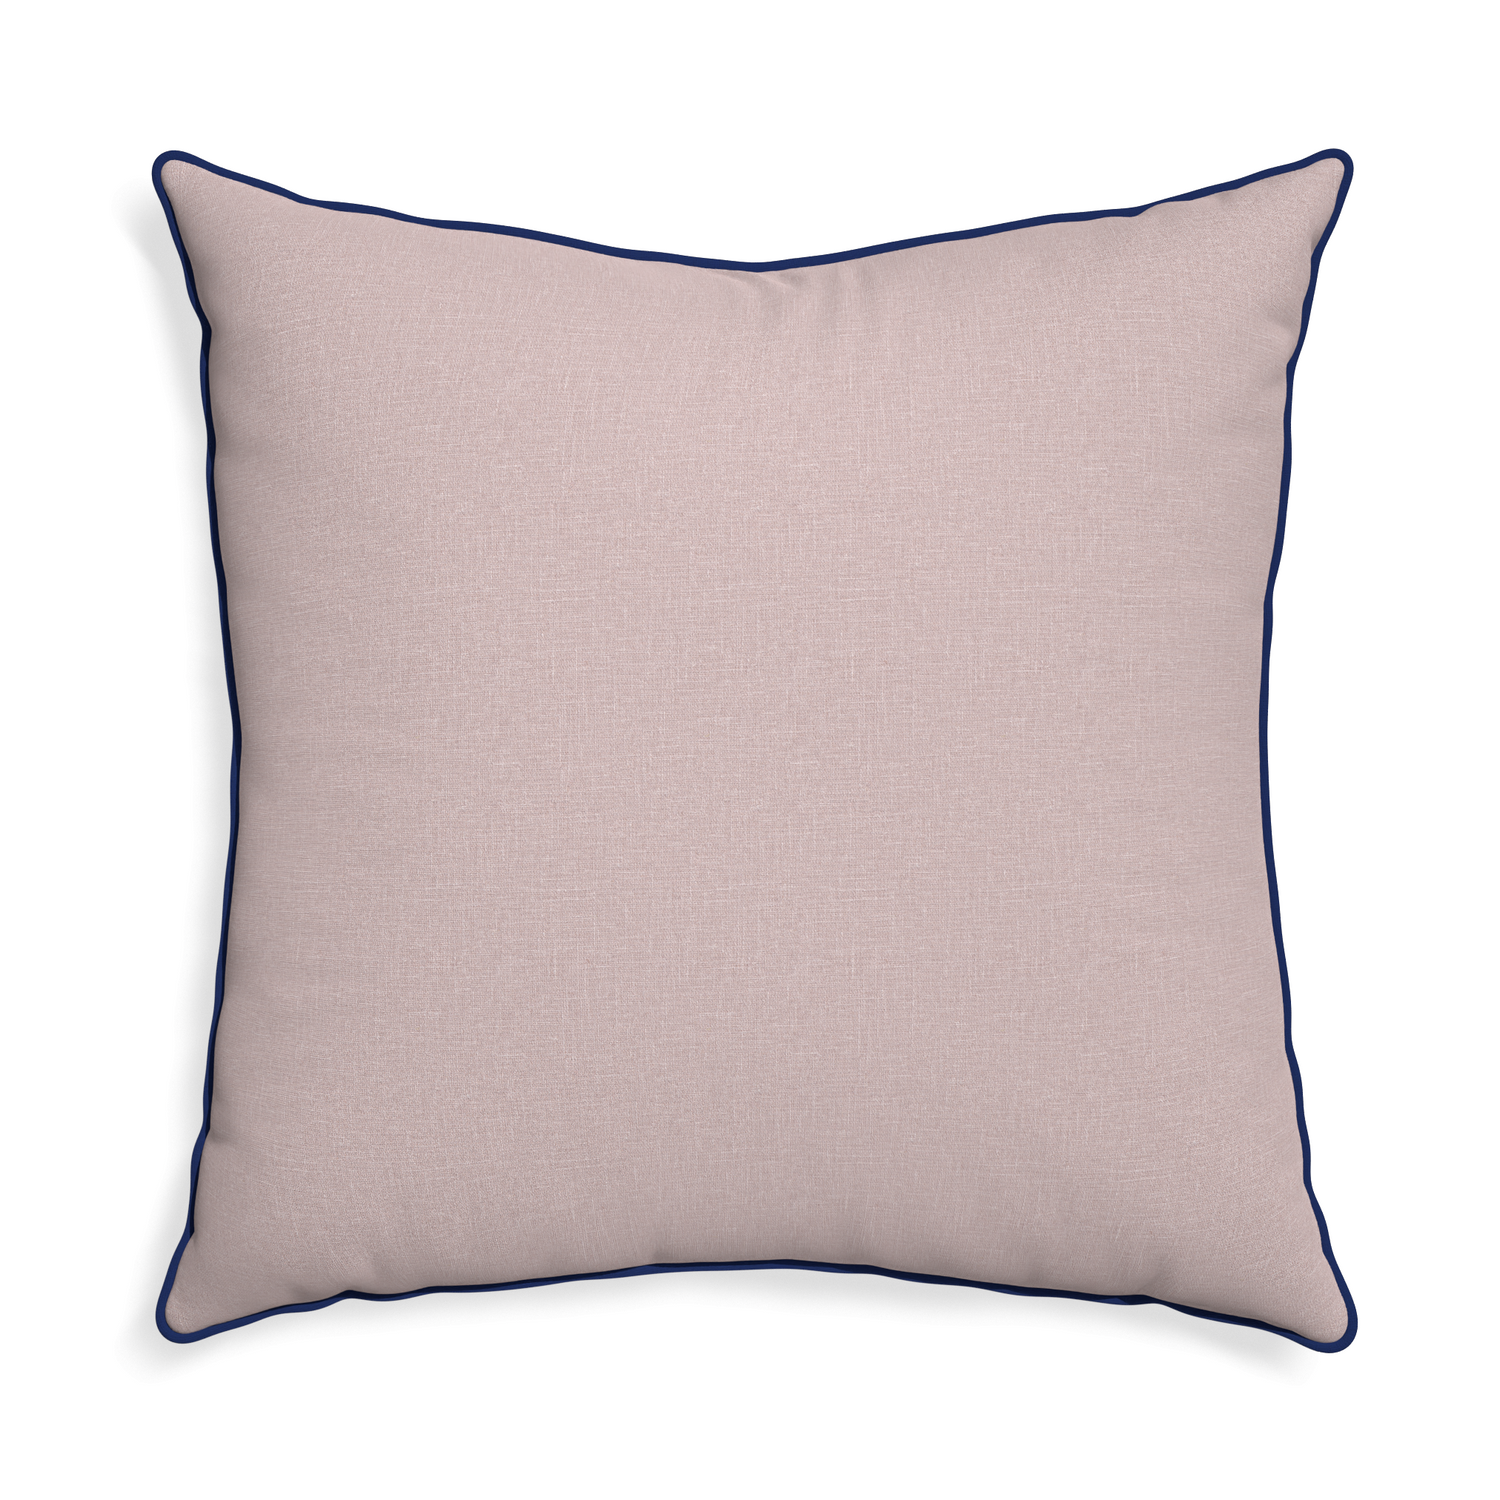 Euro-sham orchid custom mauve pinkpillow with midnight piping on white background